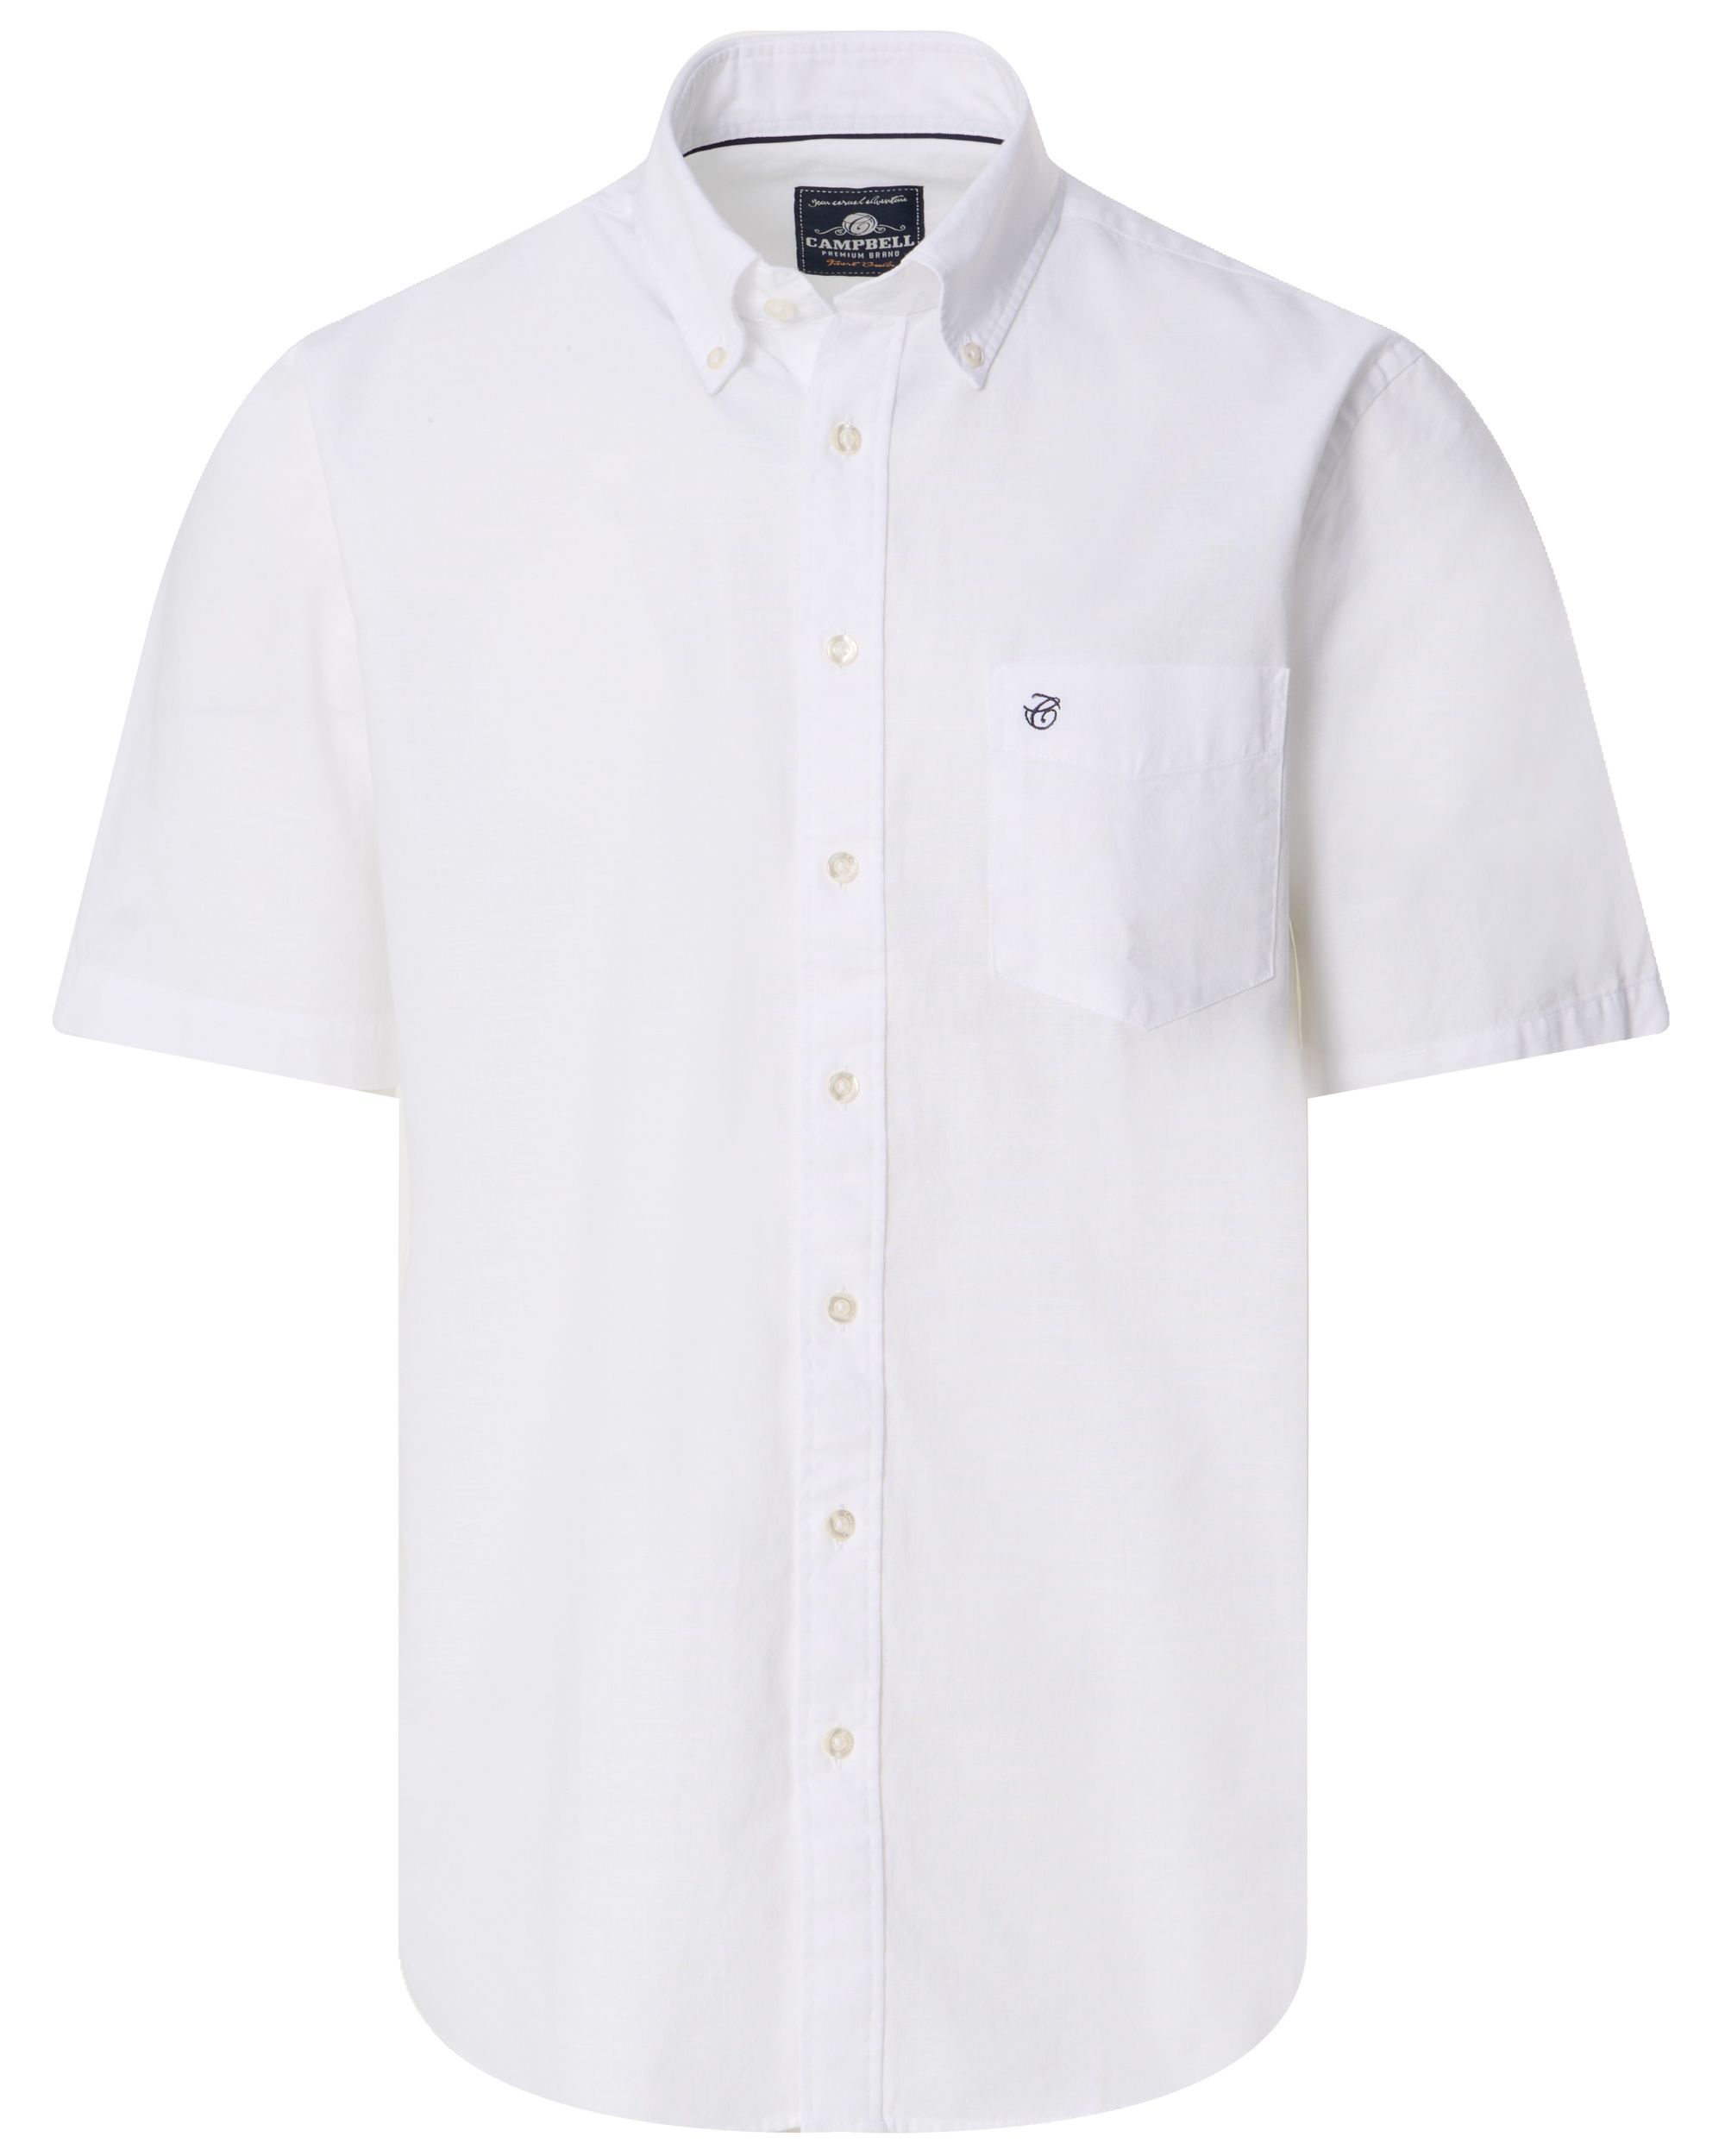 Campbell Classic Casual Overhemd KM WHITE 091757-001-L